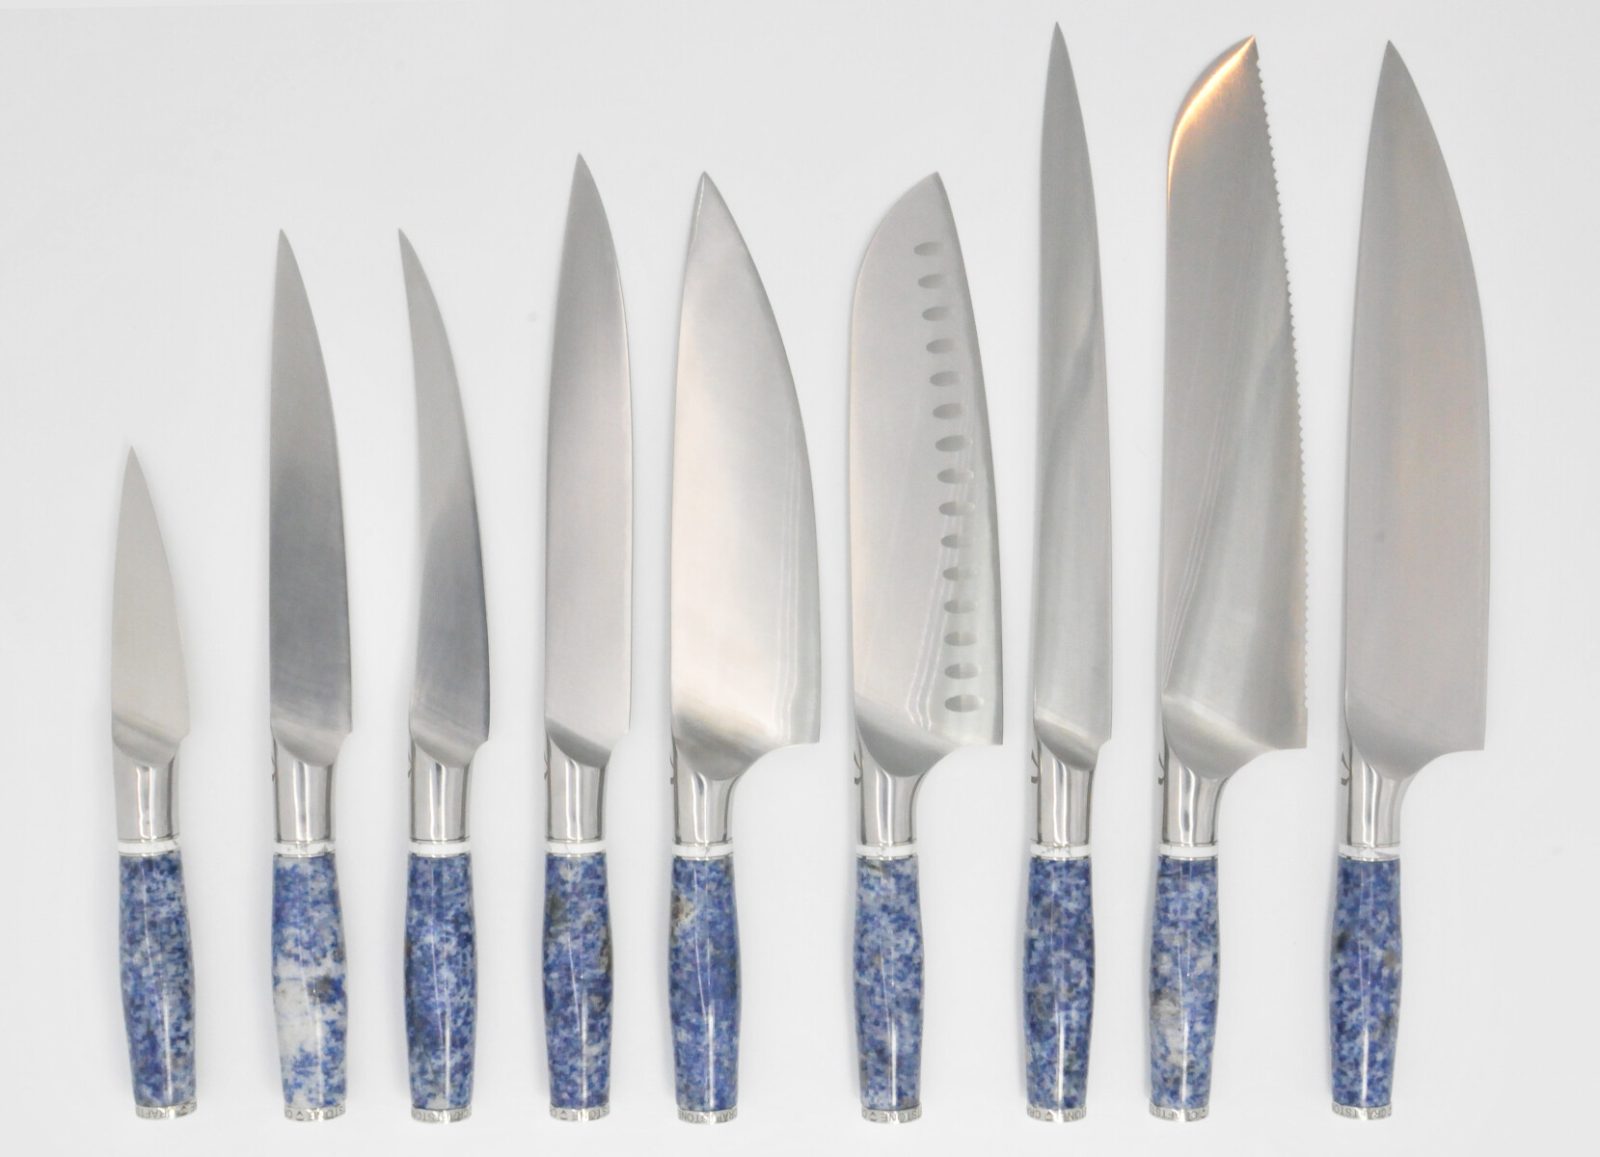 https://www.craftstoneknives.com/wp-content/uploads/2019/09/9-Knife-Set-with-a-Blue-Dot-Marble-Handle-White-Cubic-Zirconia-Stone-at-the-Back-of-the-Knife-and-White-Howlite-and-Stainless-Steel-Rings.jpg